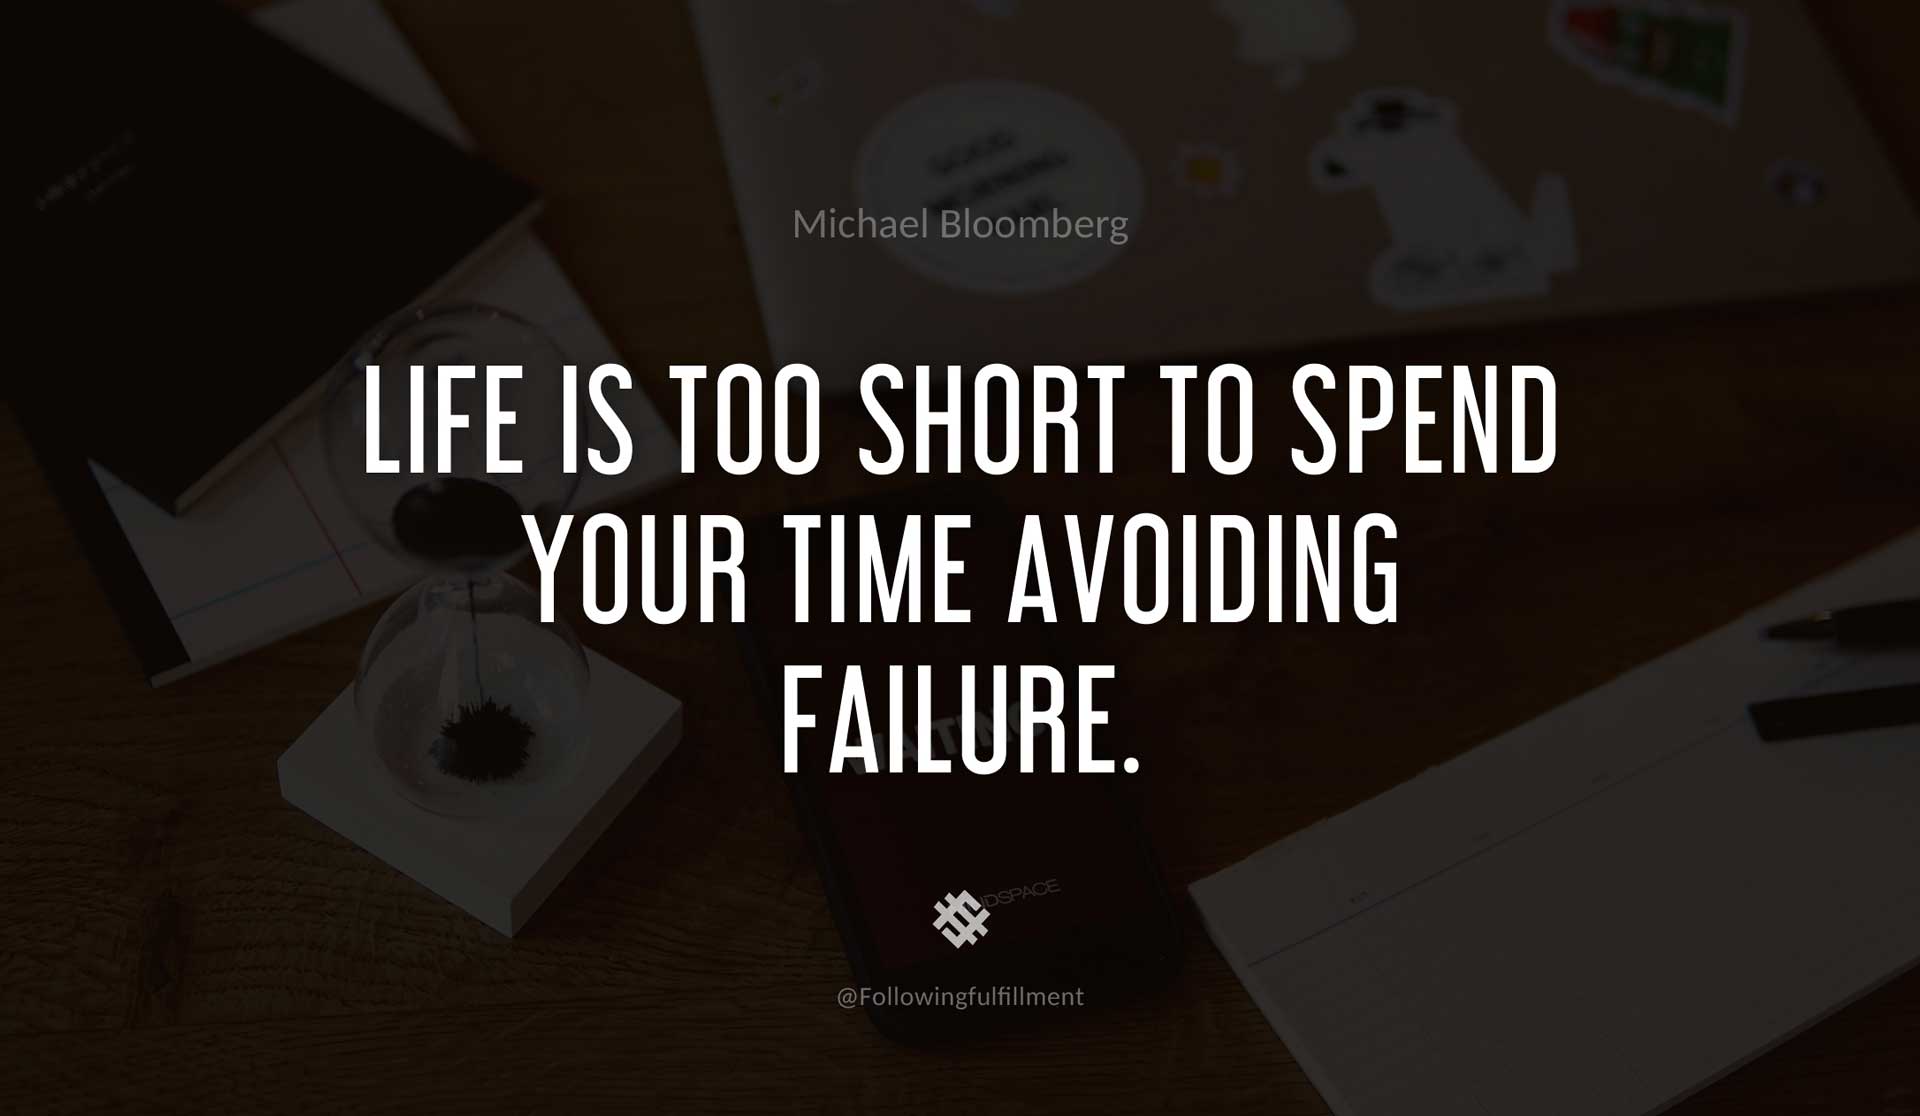 Life-is-too-short-to-spend-your-time-avoiding-failure.-MICHAEL-BLOOMBERG-Quote.jpg